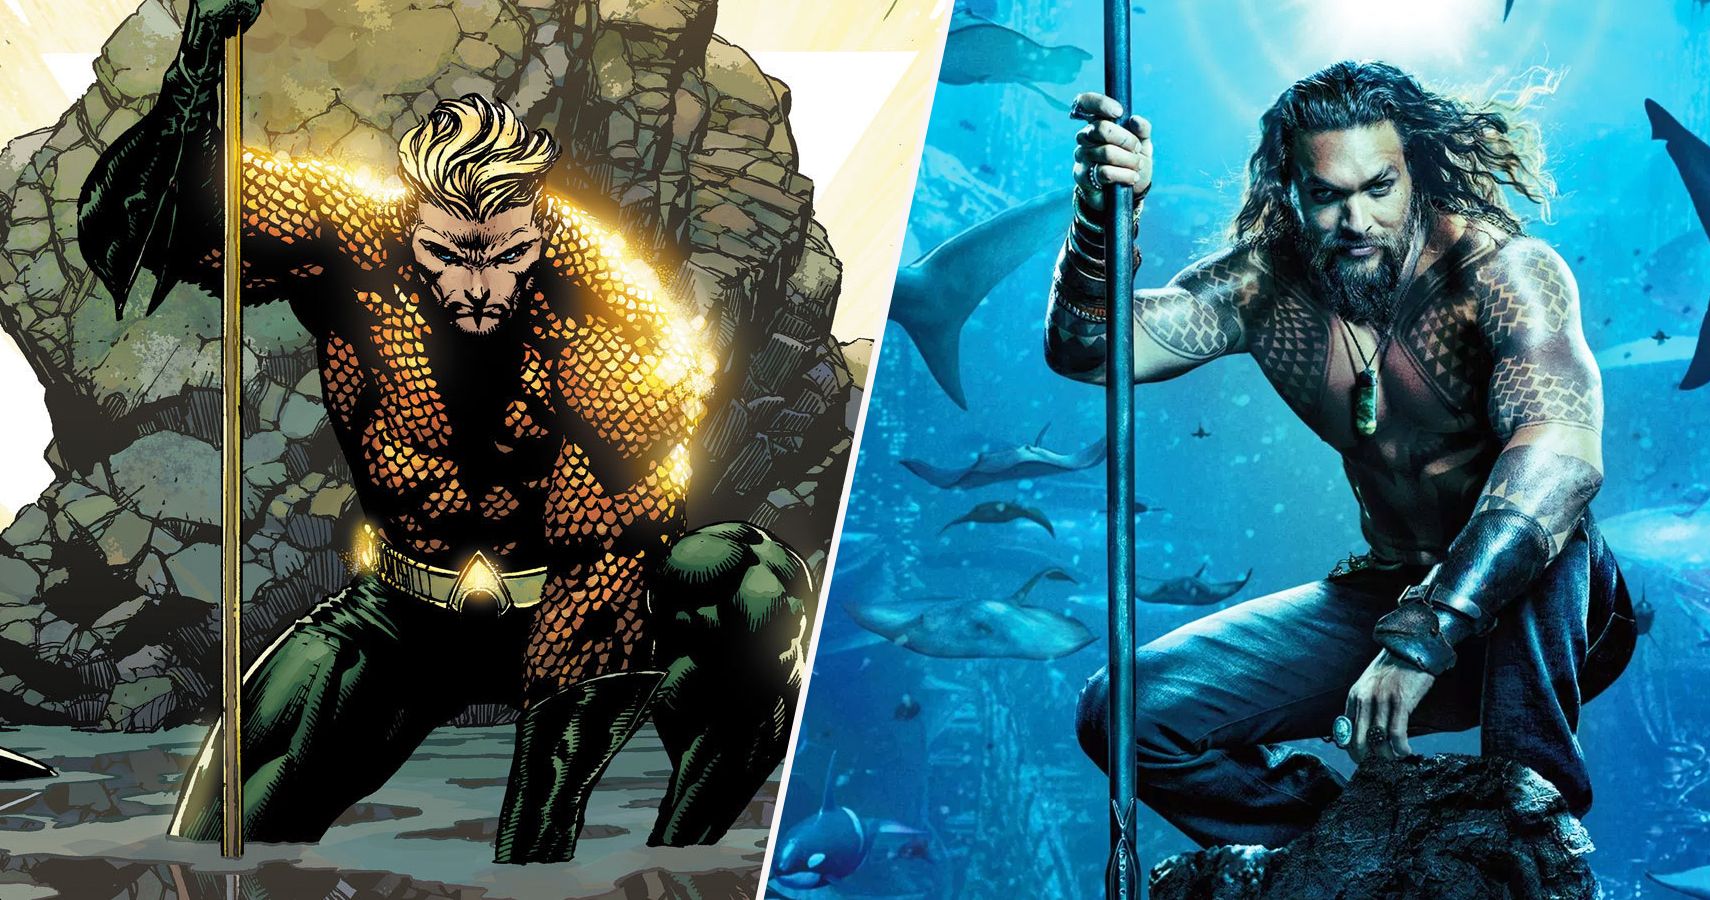 Aquaman: 10 Things The Movie Changed For The Better (And 10 It Made Worse)